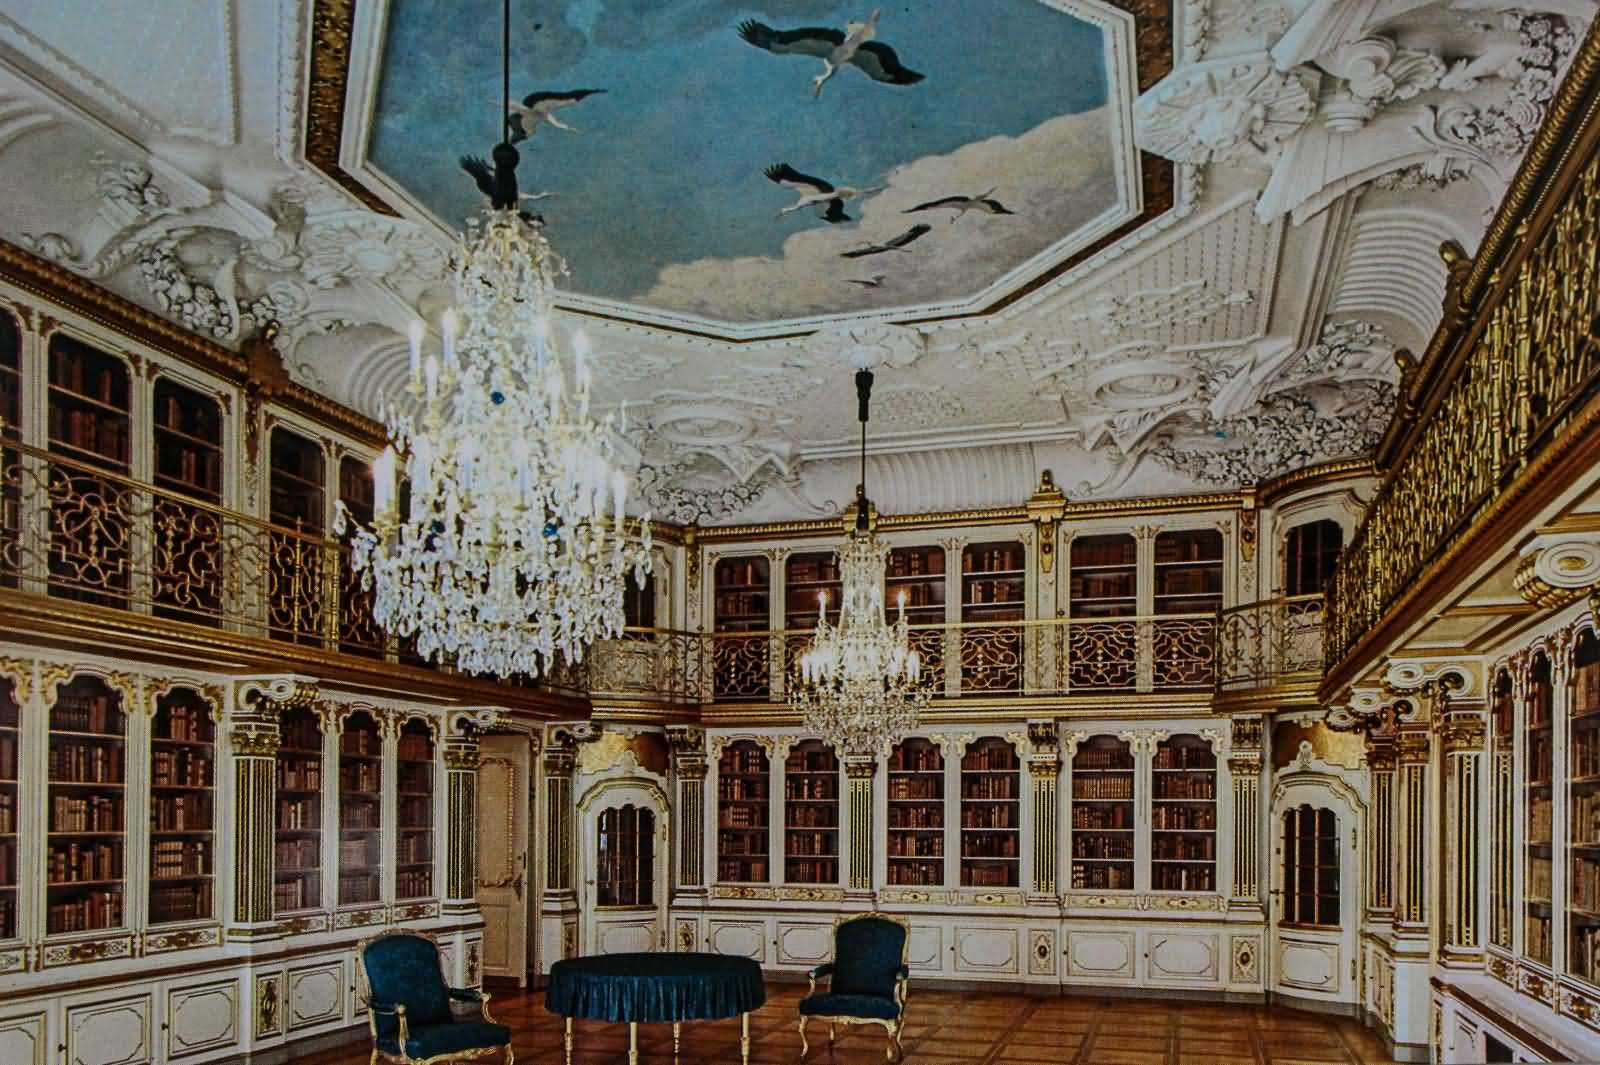 Queen’s Library Inside Christiansborg Palace In Denmark